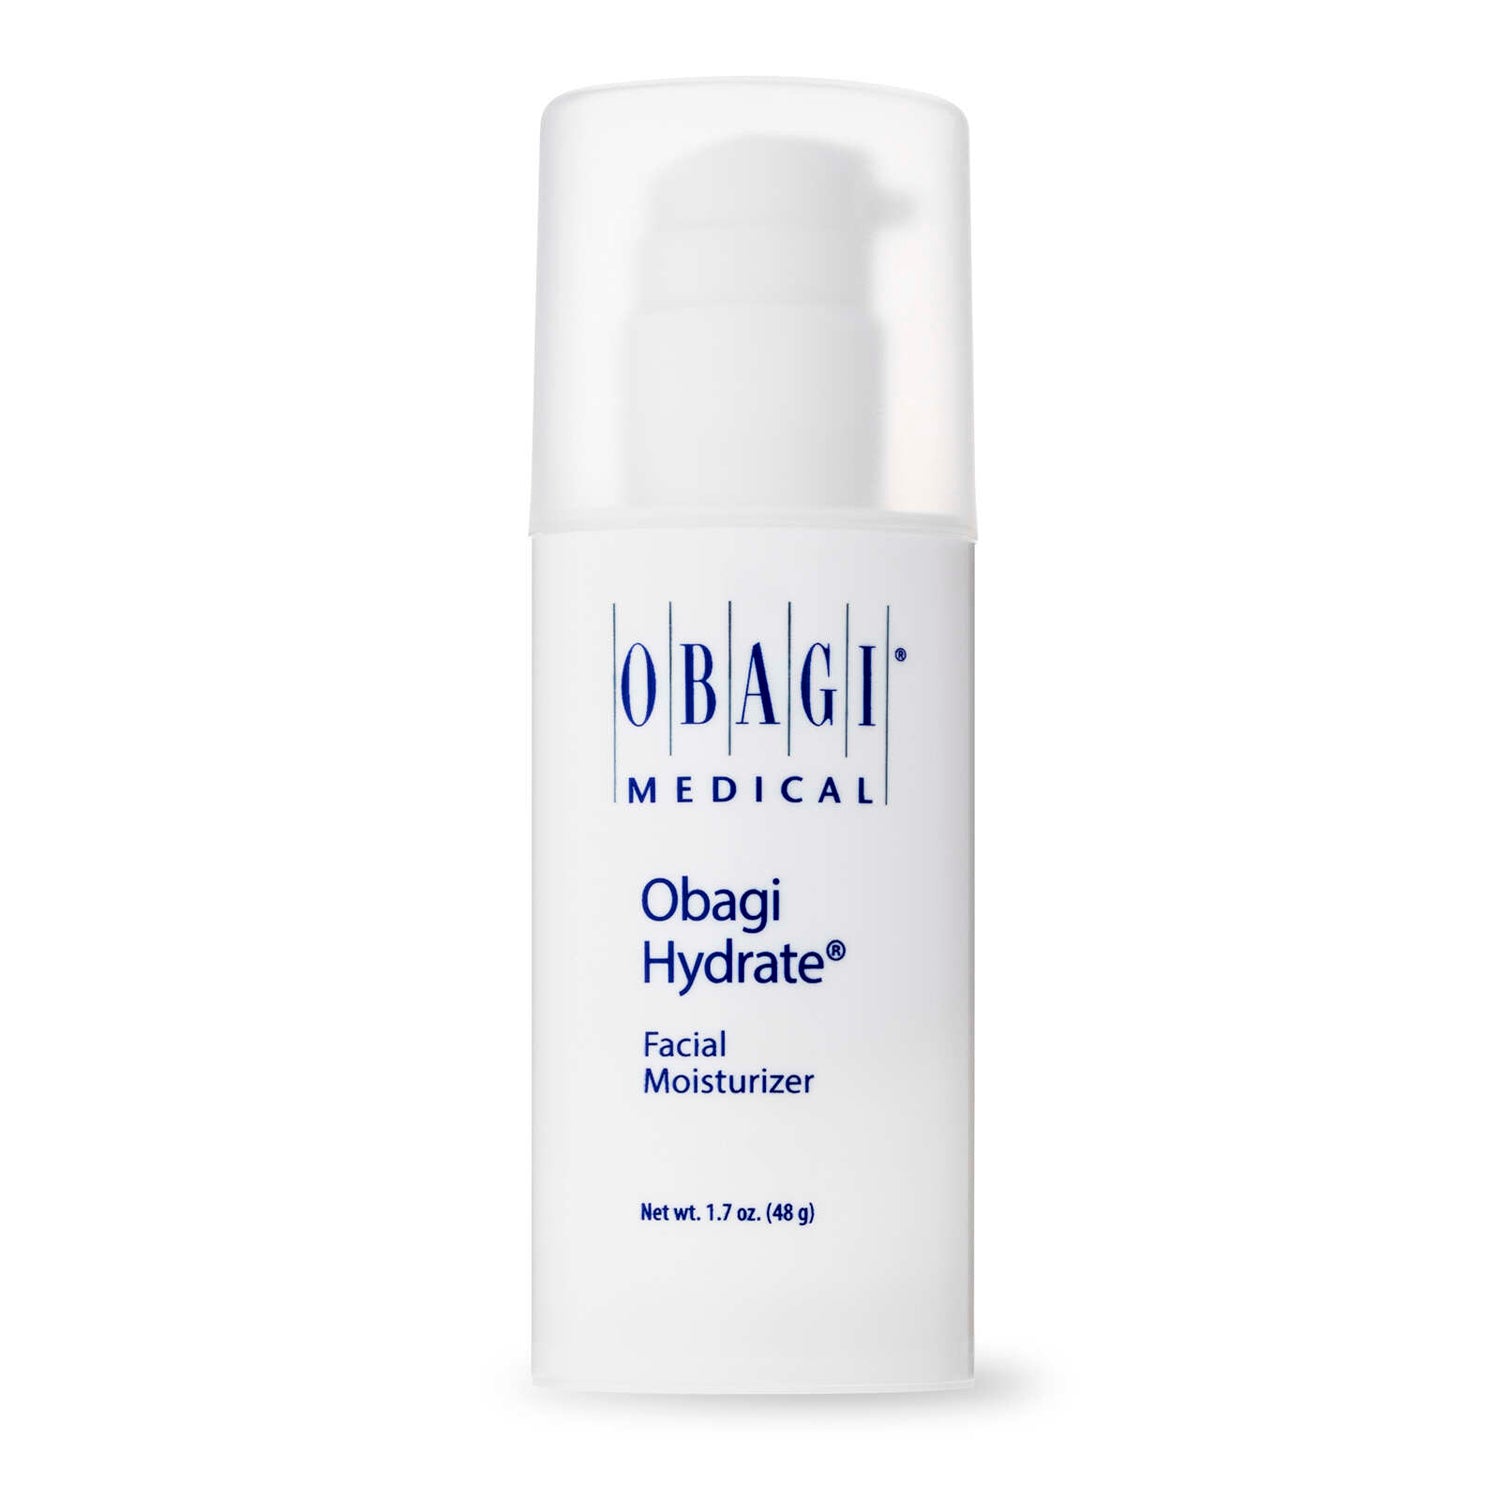 Obagi Hydrate Facial Moisturizer from MyExceptionalSkinCare.com Product